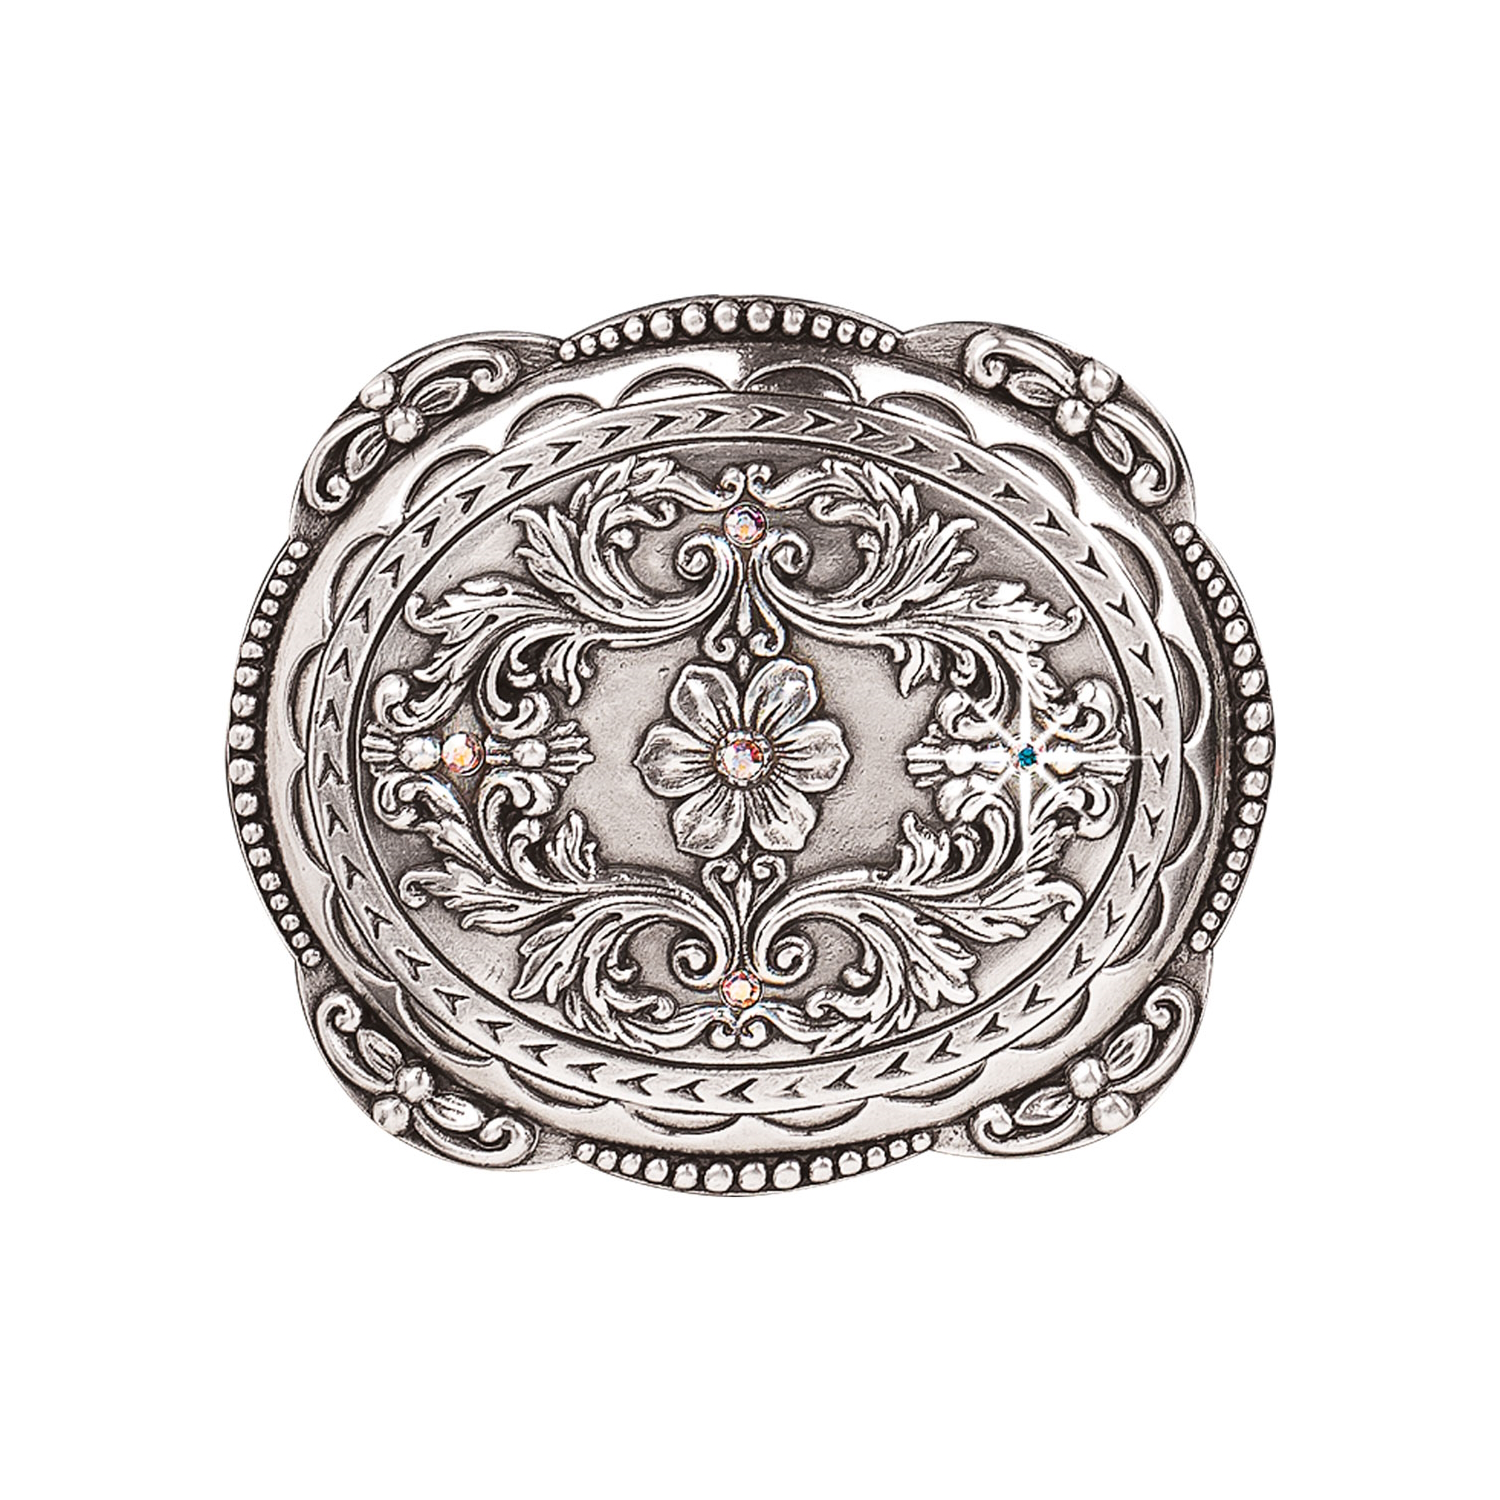 MF-37538 Belt Buckle Silver with Rhinestones and Flowers